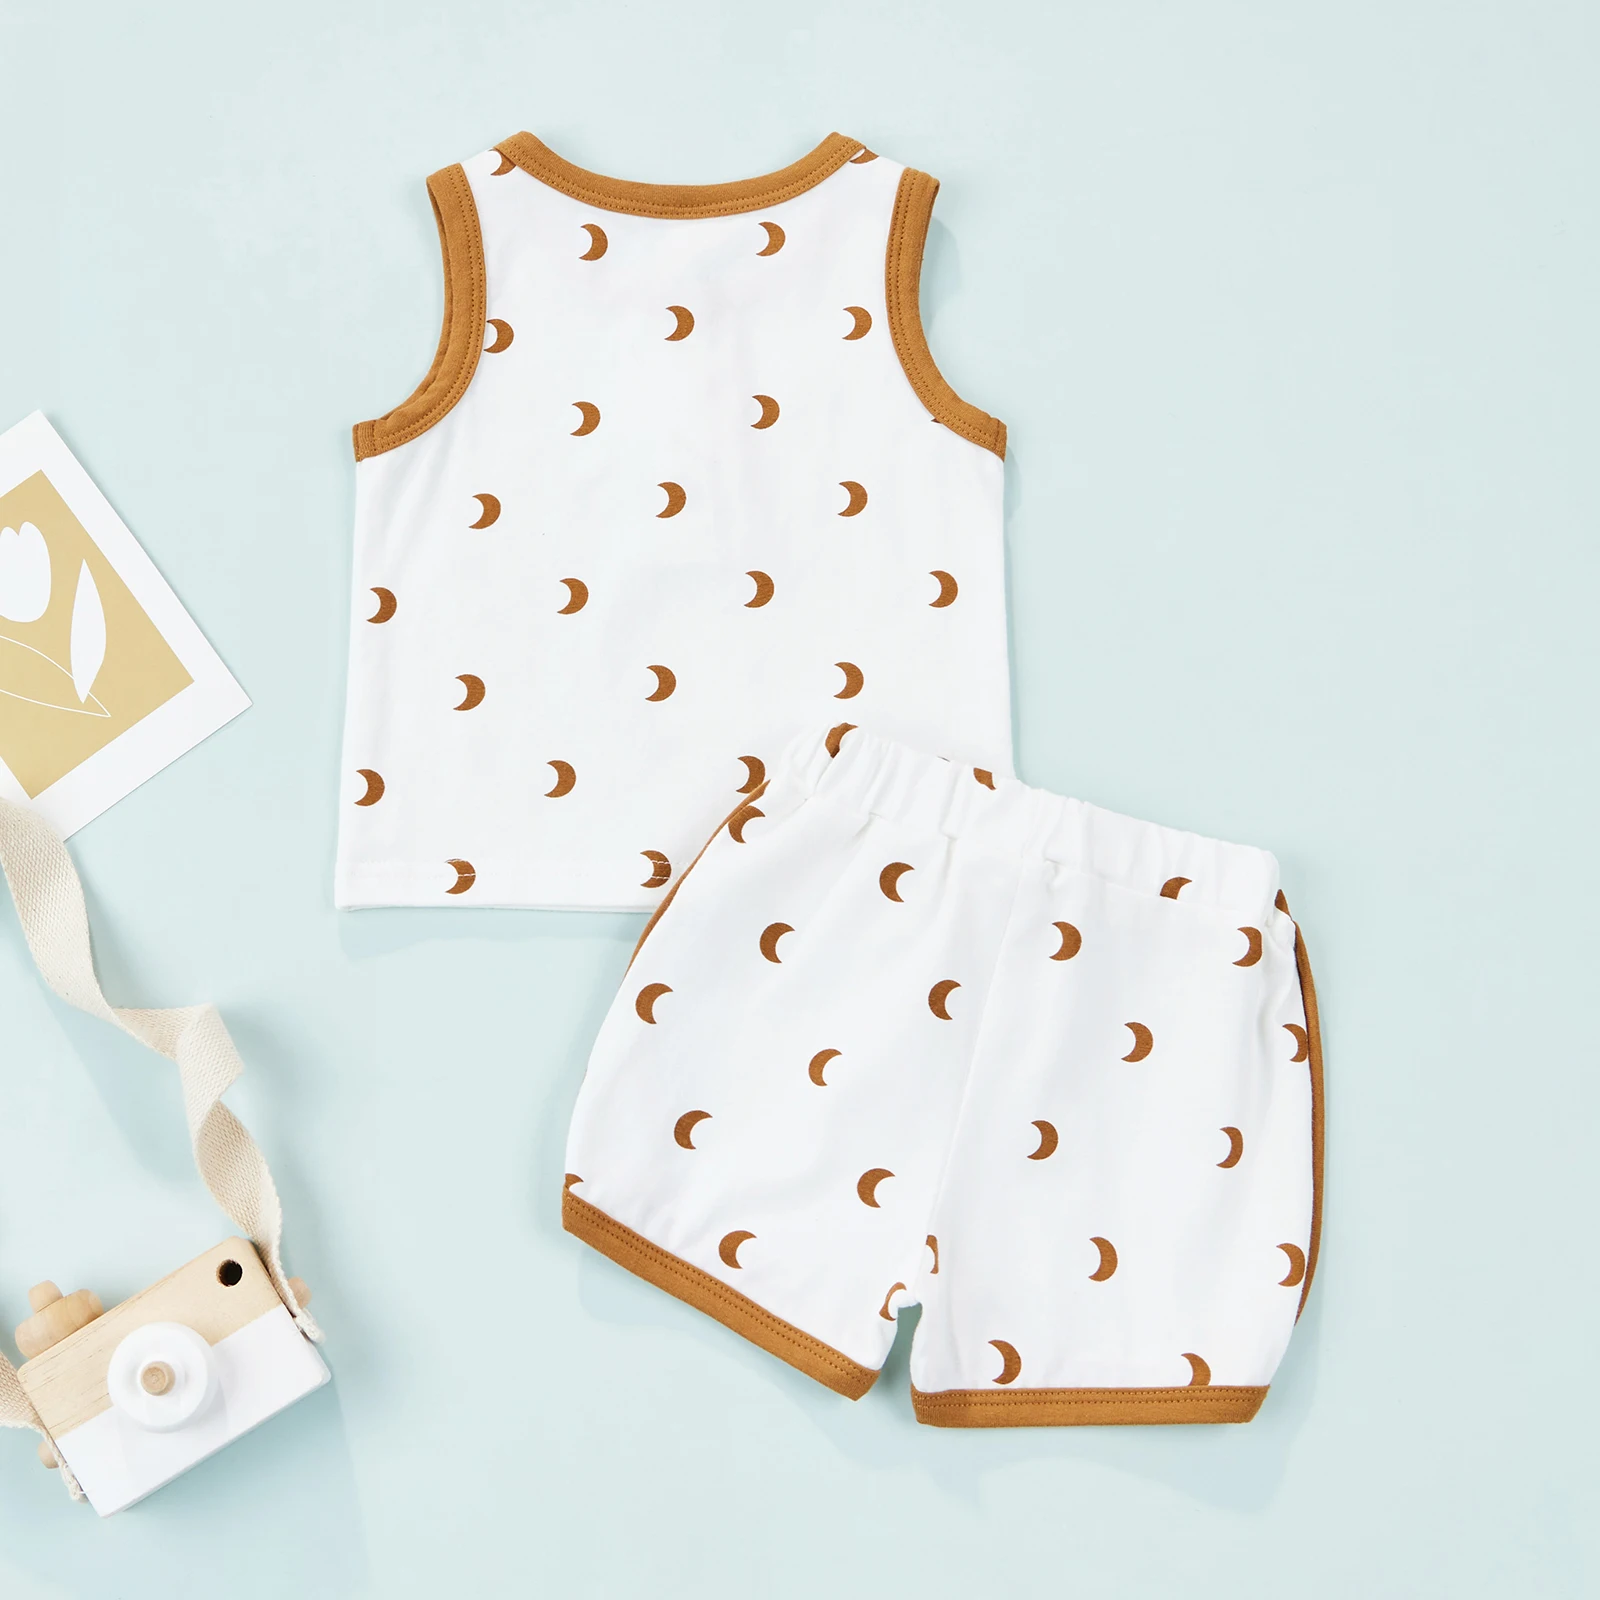 2022 0-24M Infant Girl Boy Clothes Set Casual Summer Moon Print Sleeveless Round Neck Top Vest+Shorts Loose Cotton Outfits 2pcs newborn baby clothing gift set